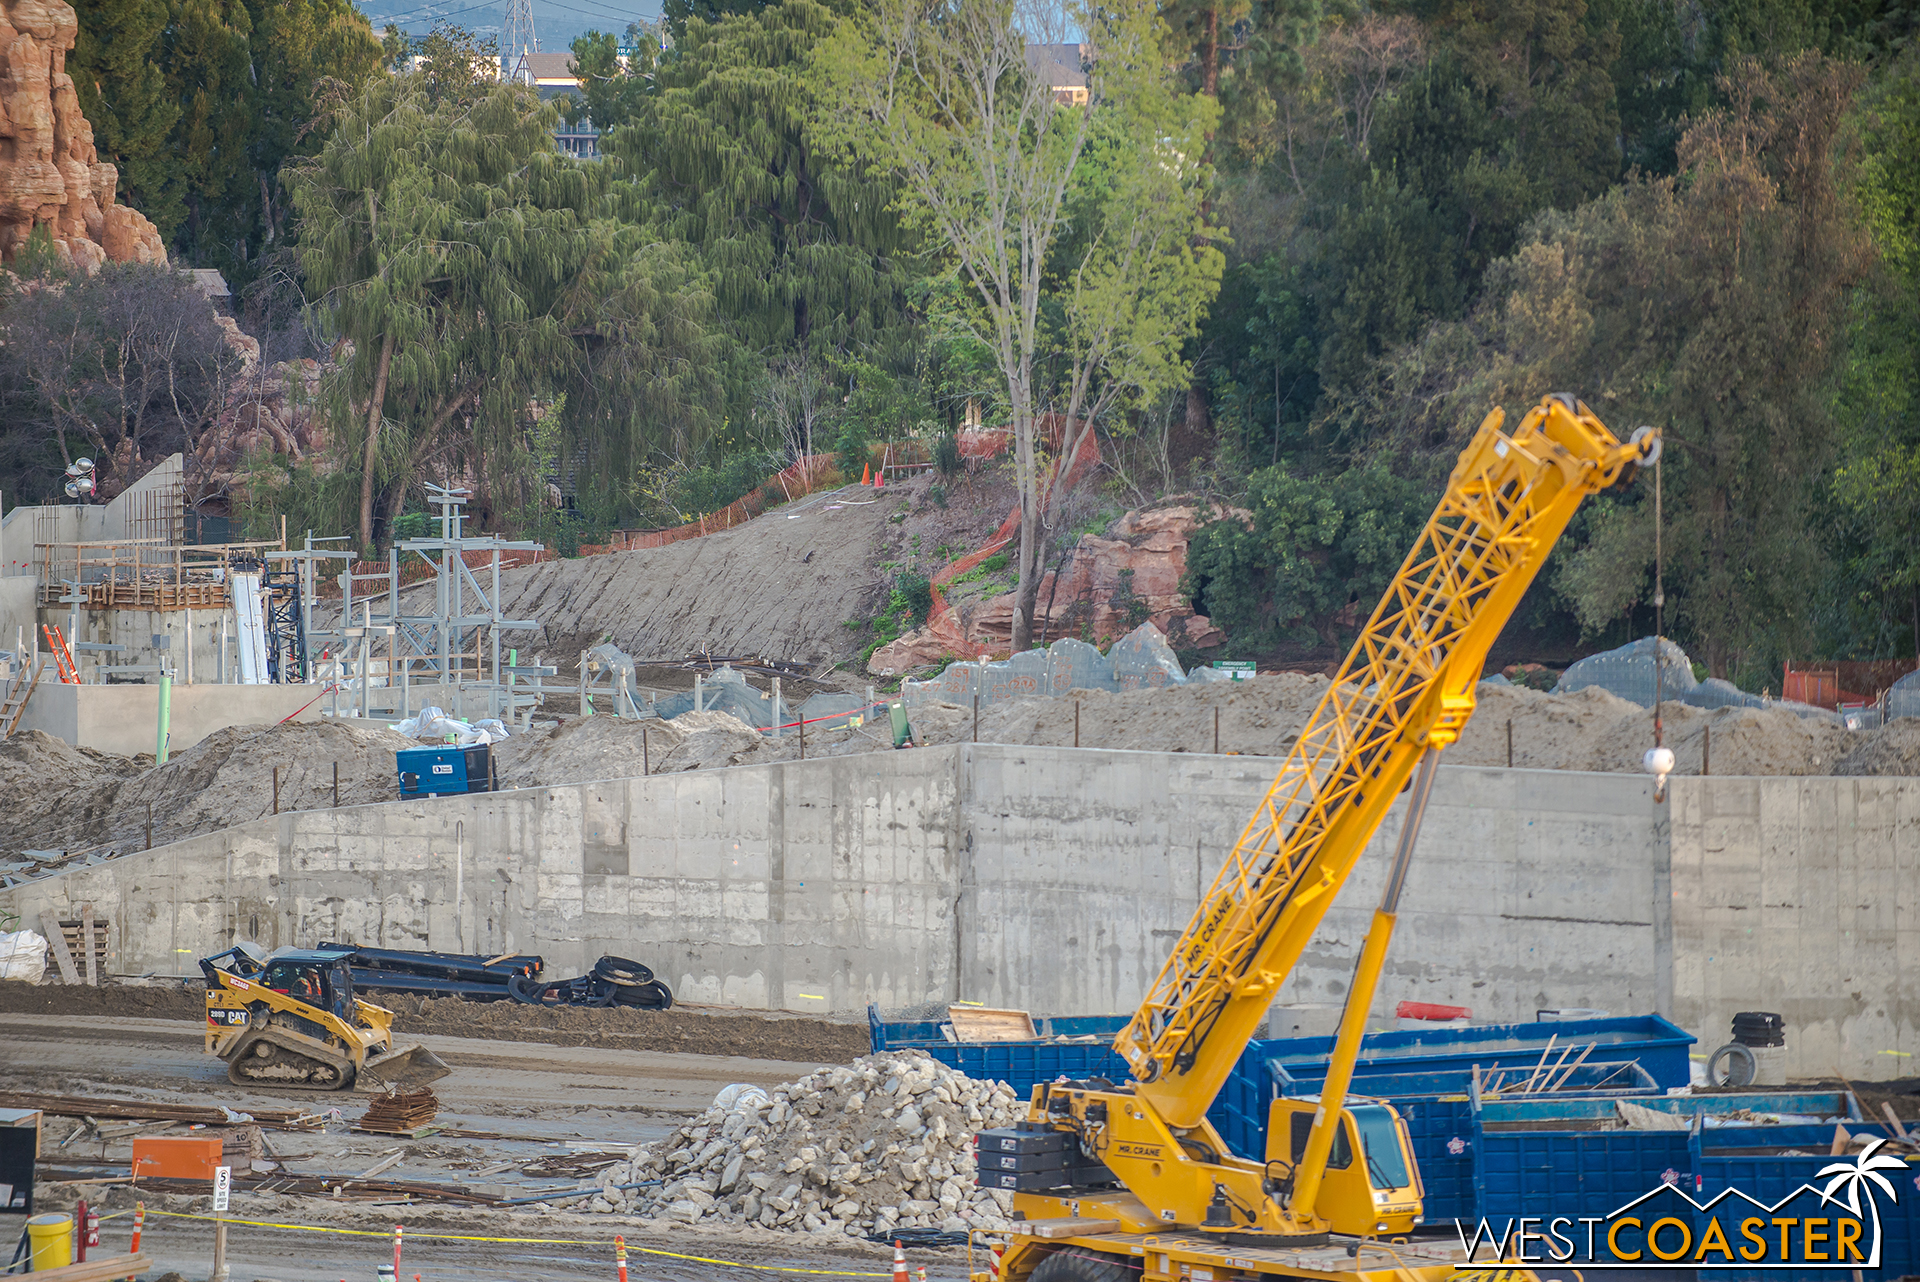  Over here, we have the backside of the rockwork that will front the reconfigured Rivers of America. 